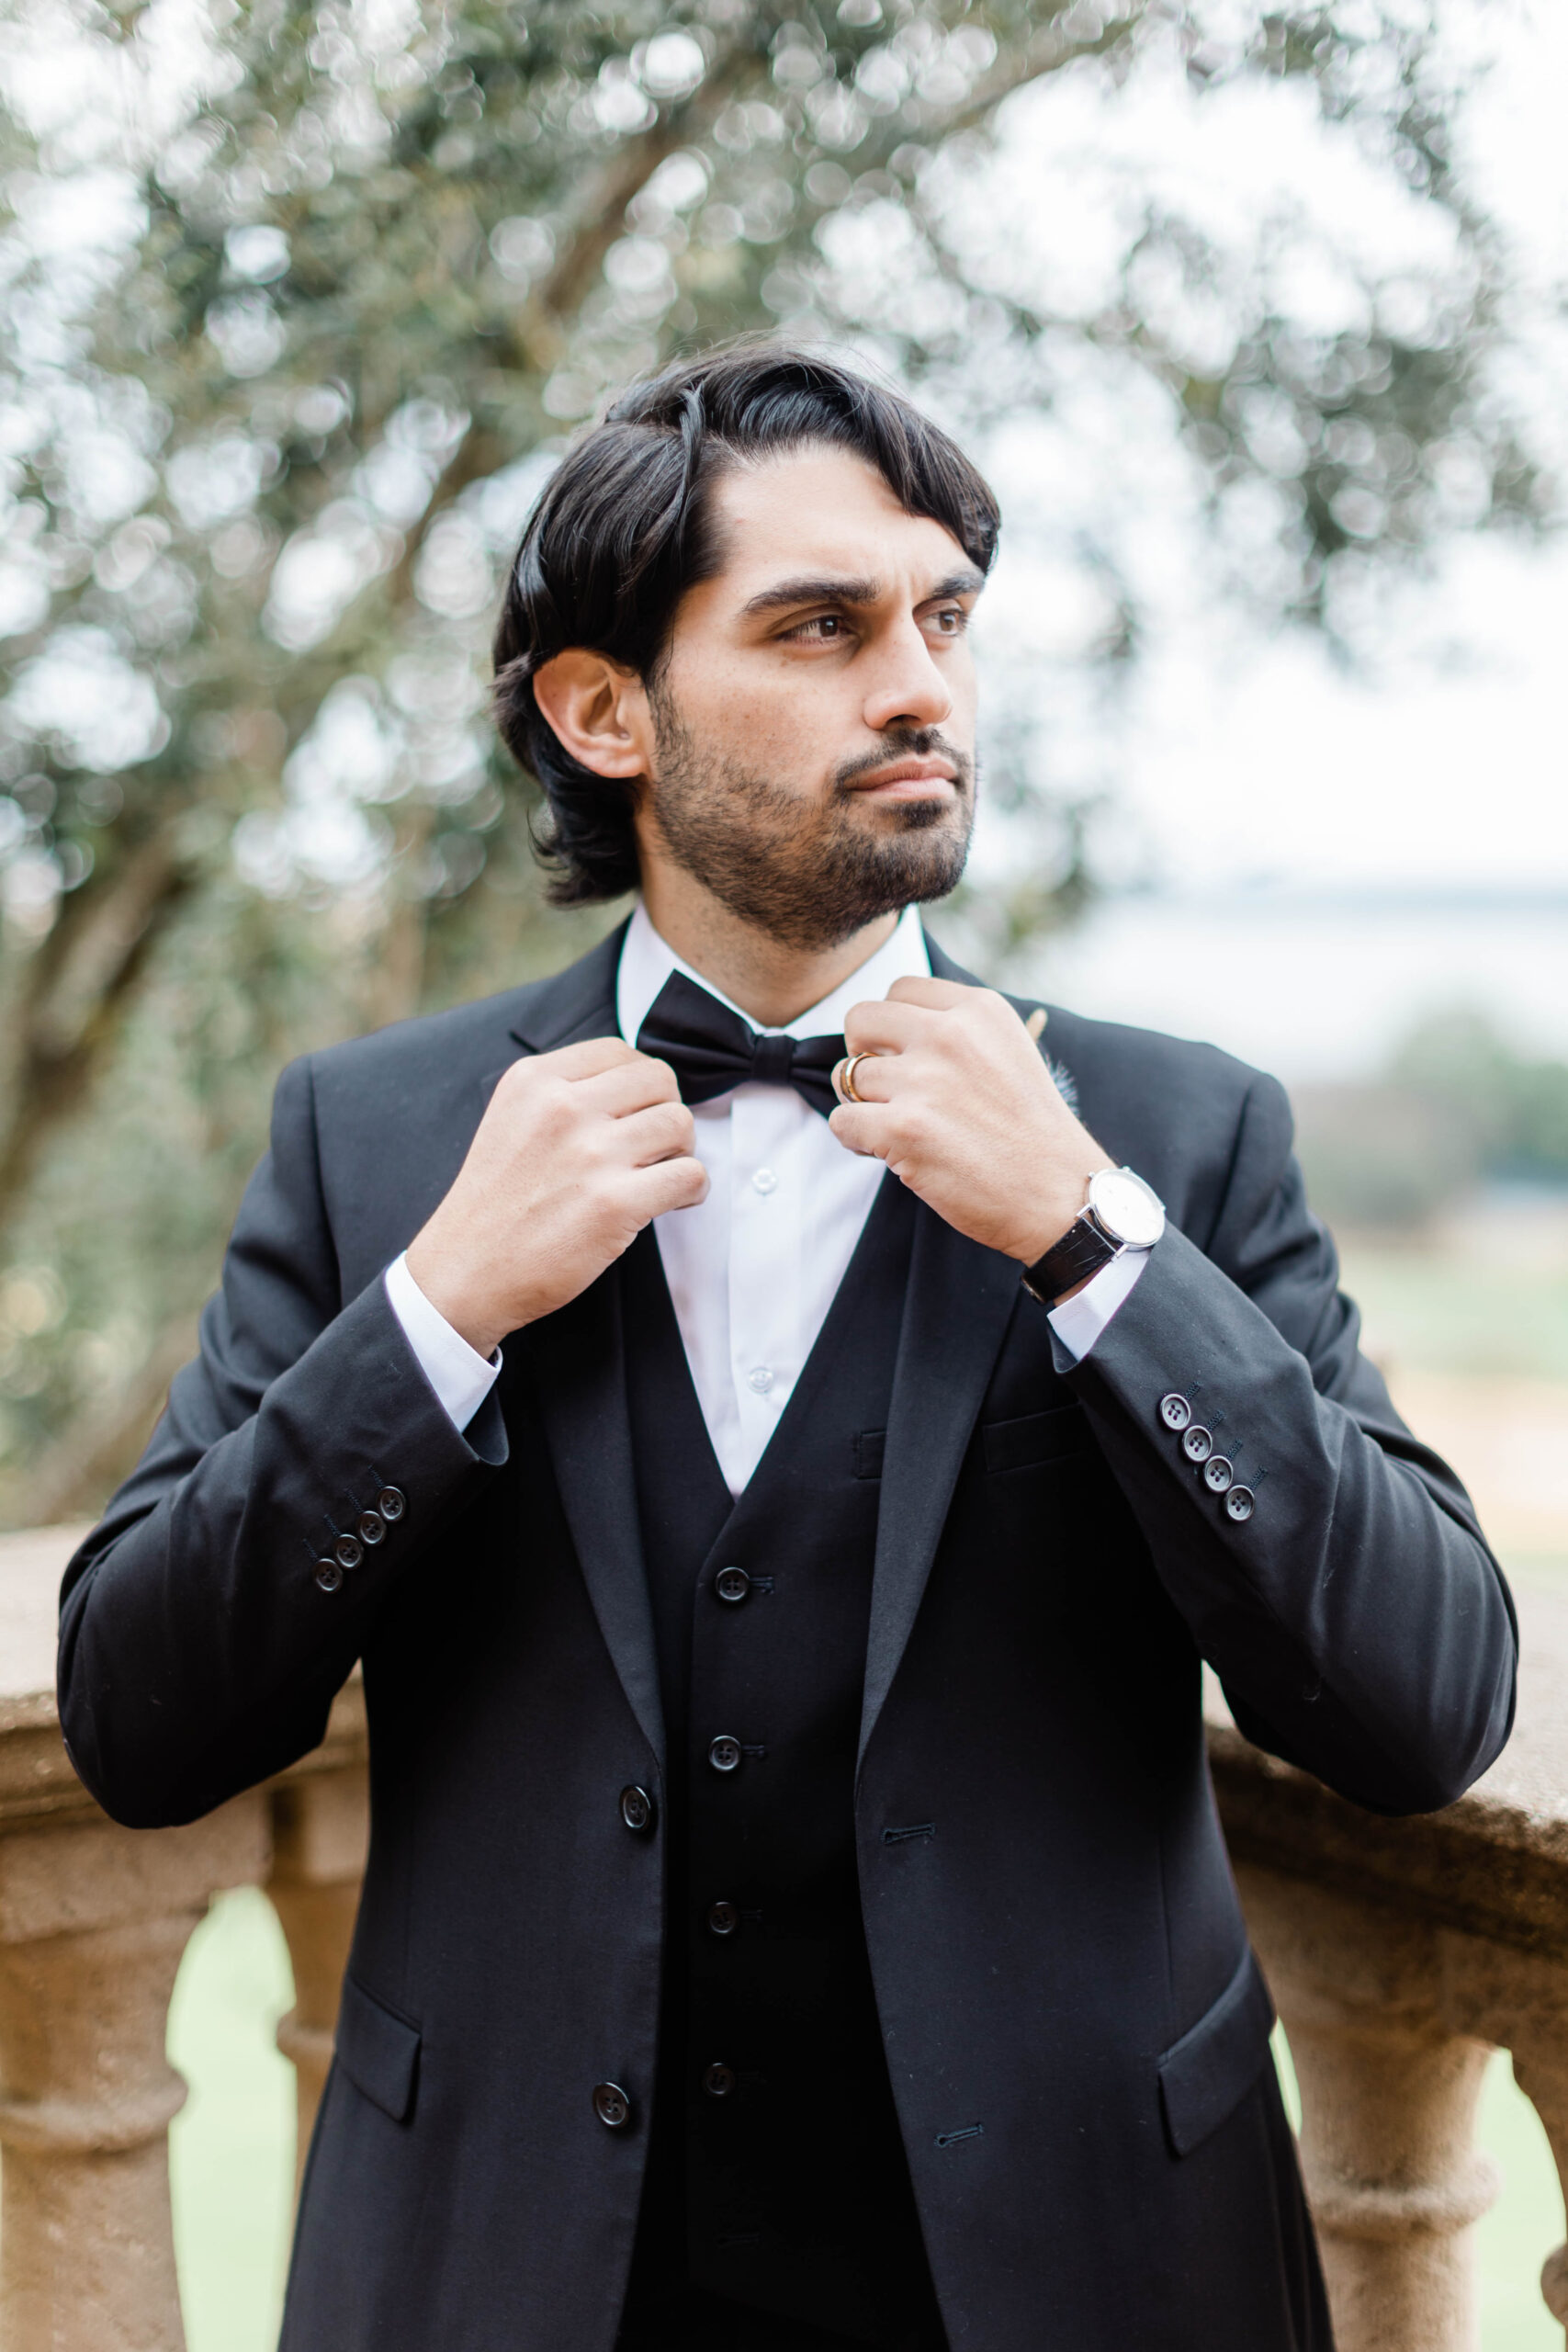 Man adjusting his bow tie showing off how to match your suit and ring